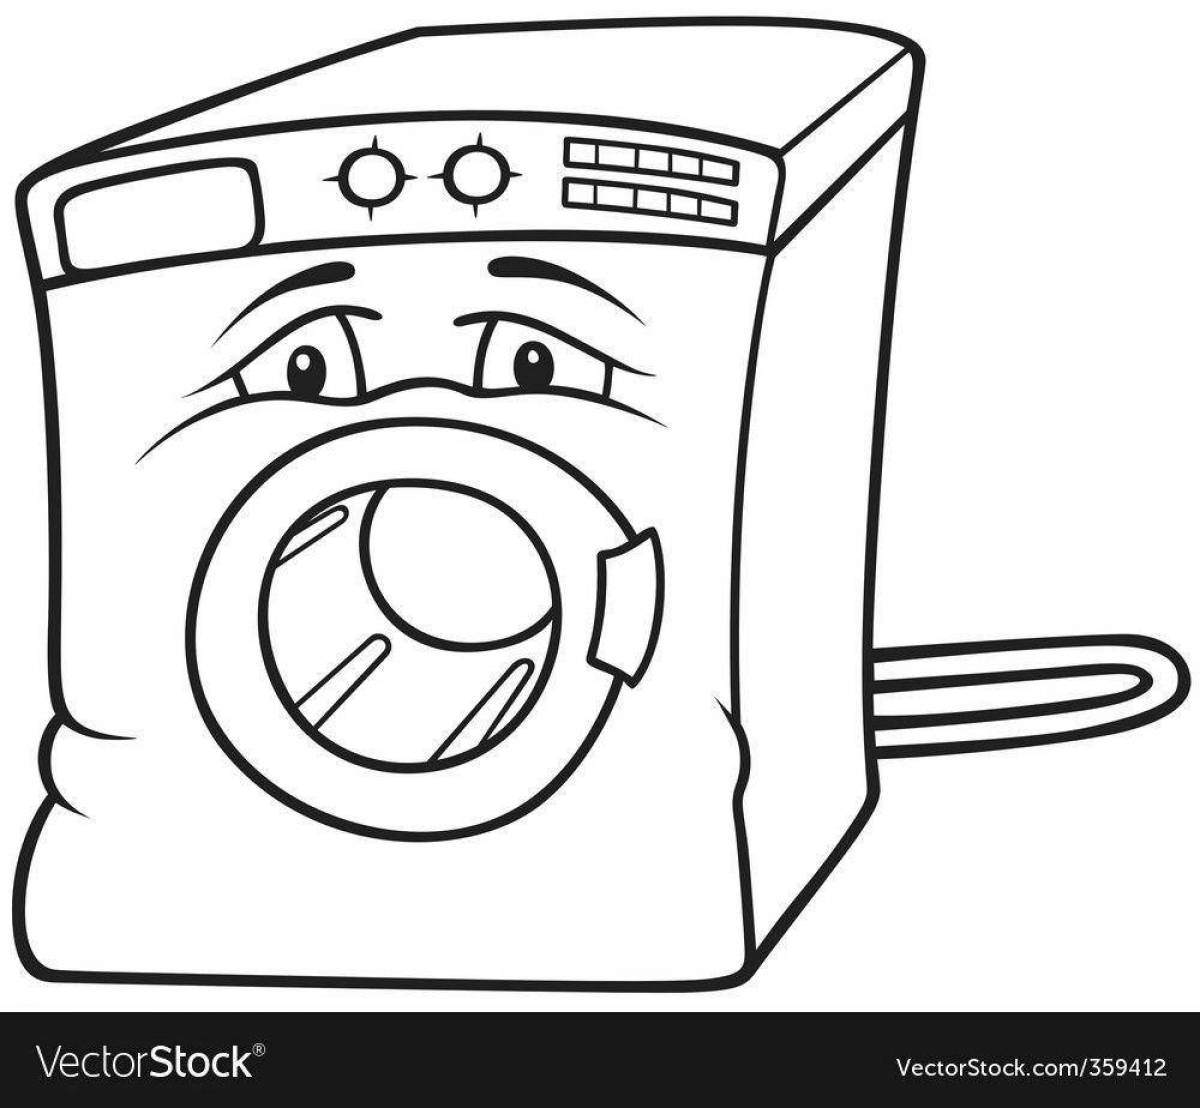 Amazing wash coloring page